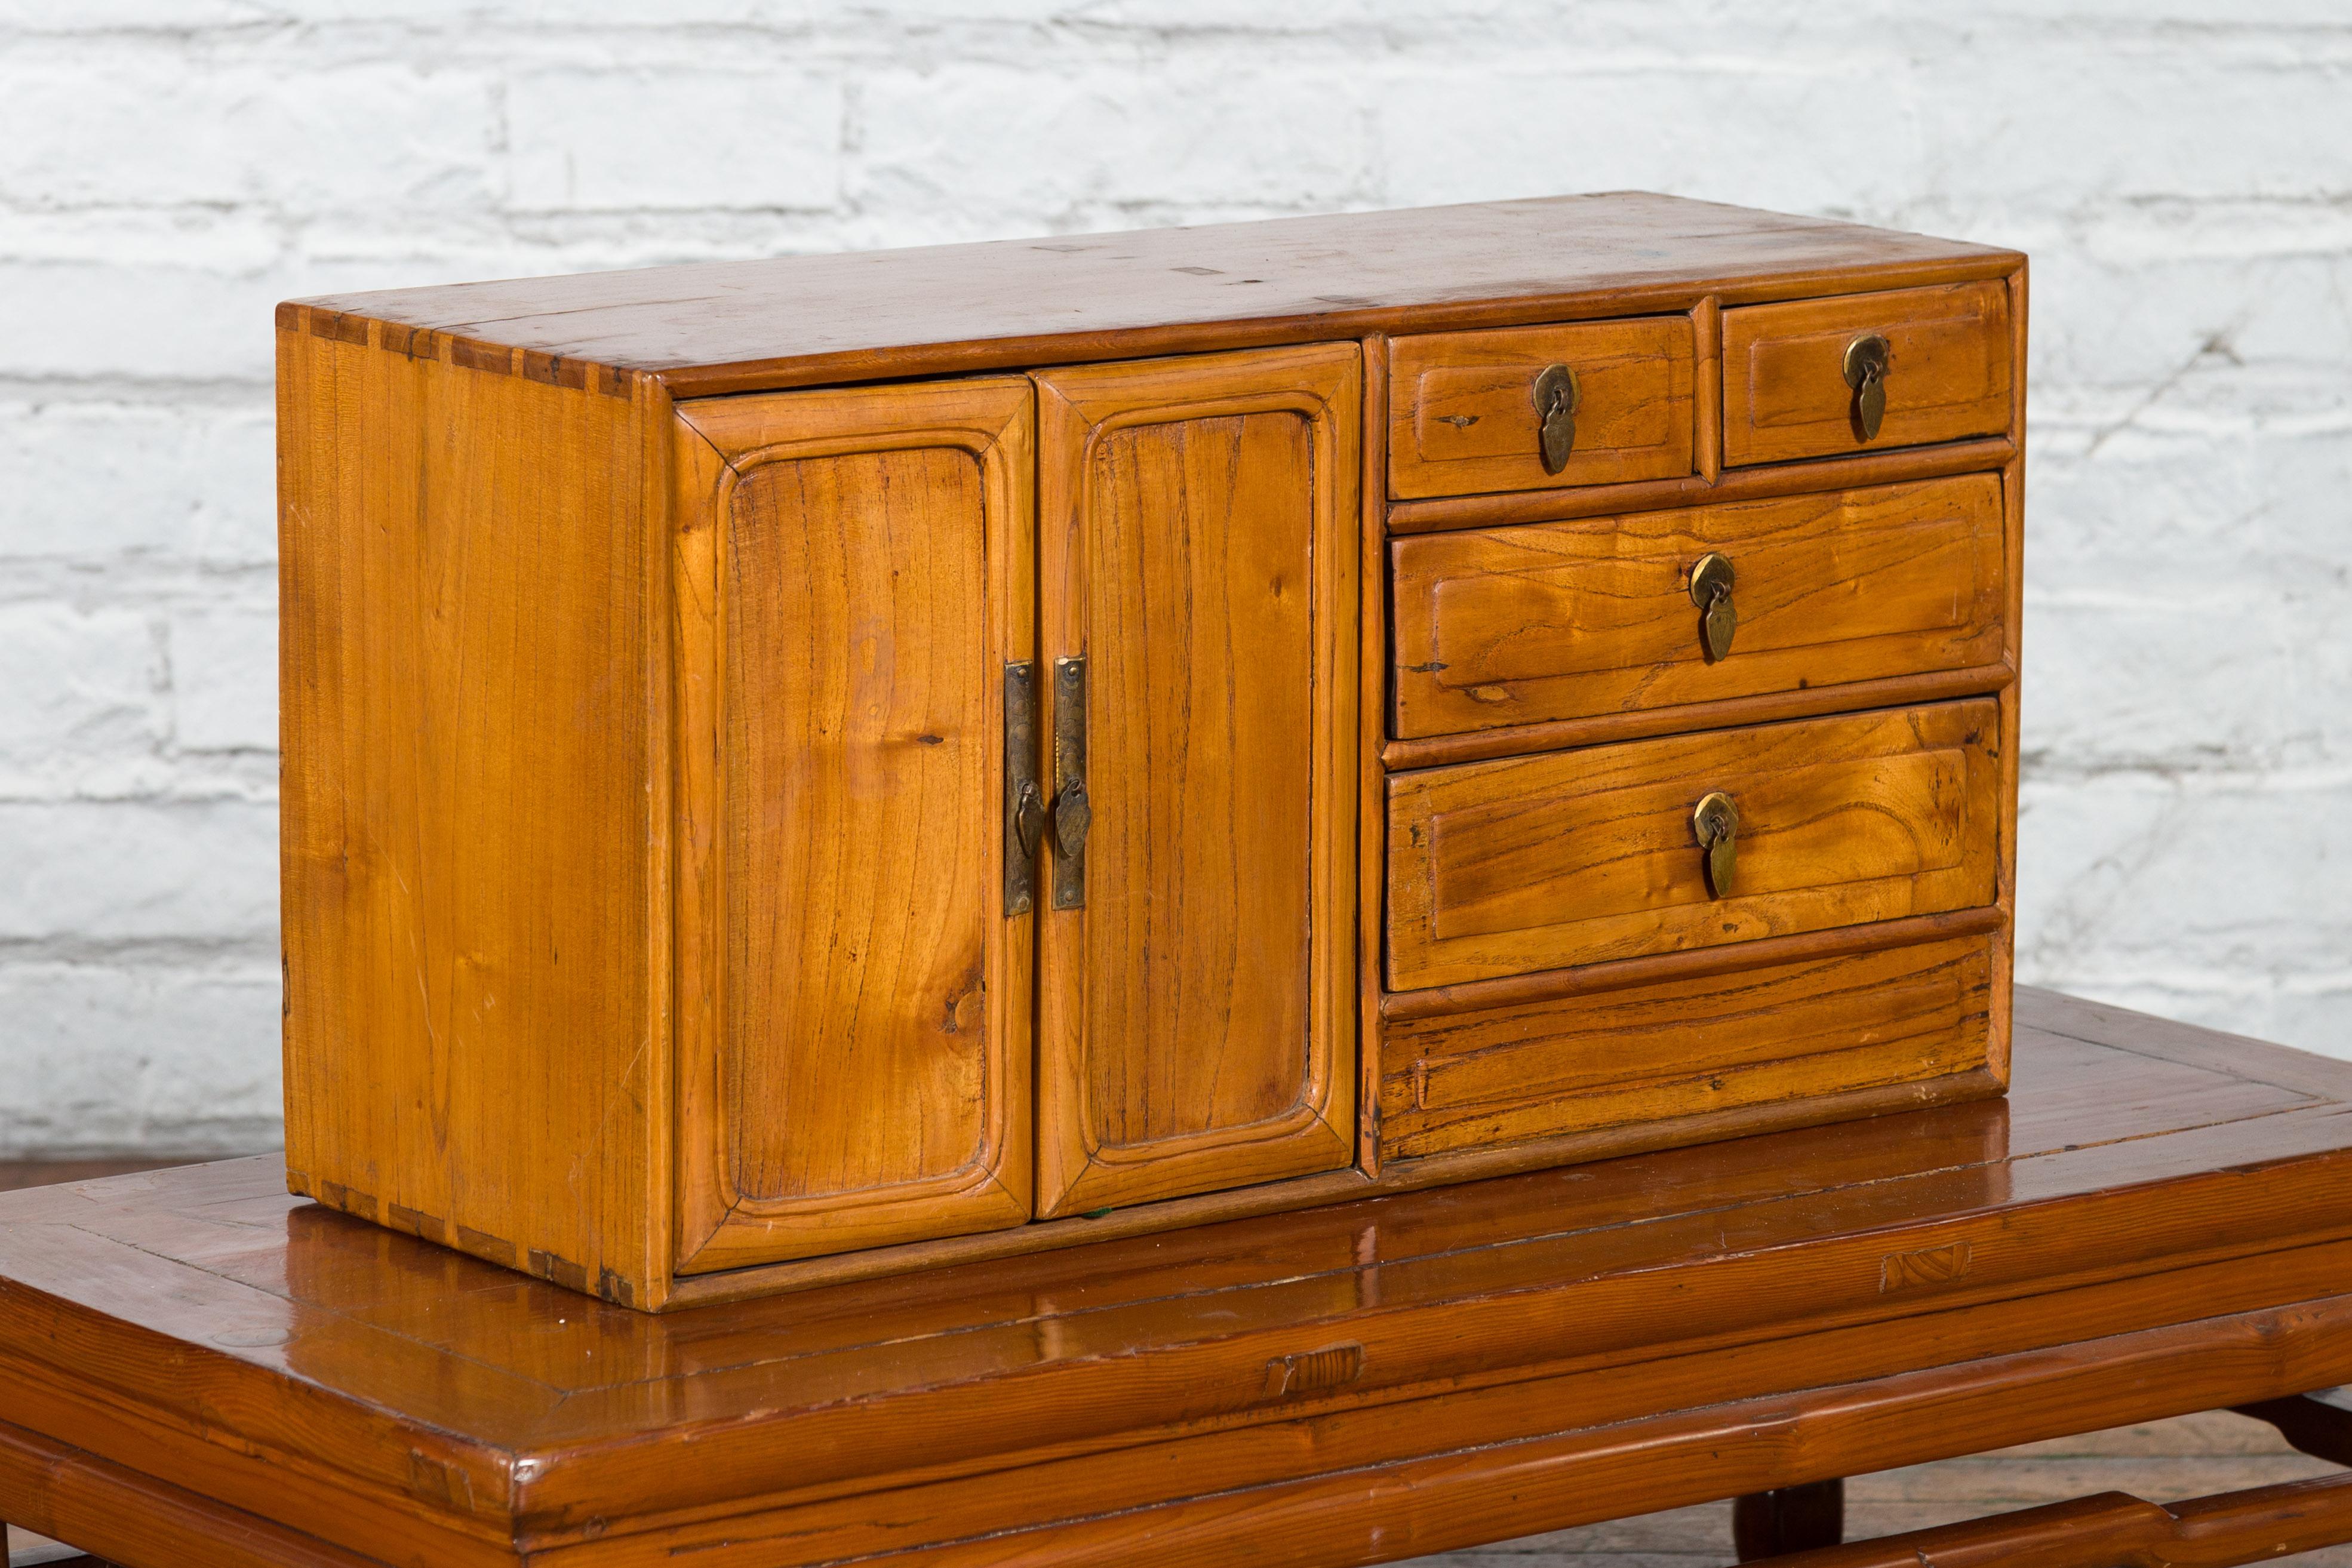 A Chinese elmwood makeup or jewelry chest from the early 20th century with five drawers and brass hardware. Created in China during the early years of the 20th century, this small elm wood makeup chest features a rectangular top with mortise and